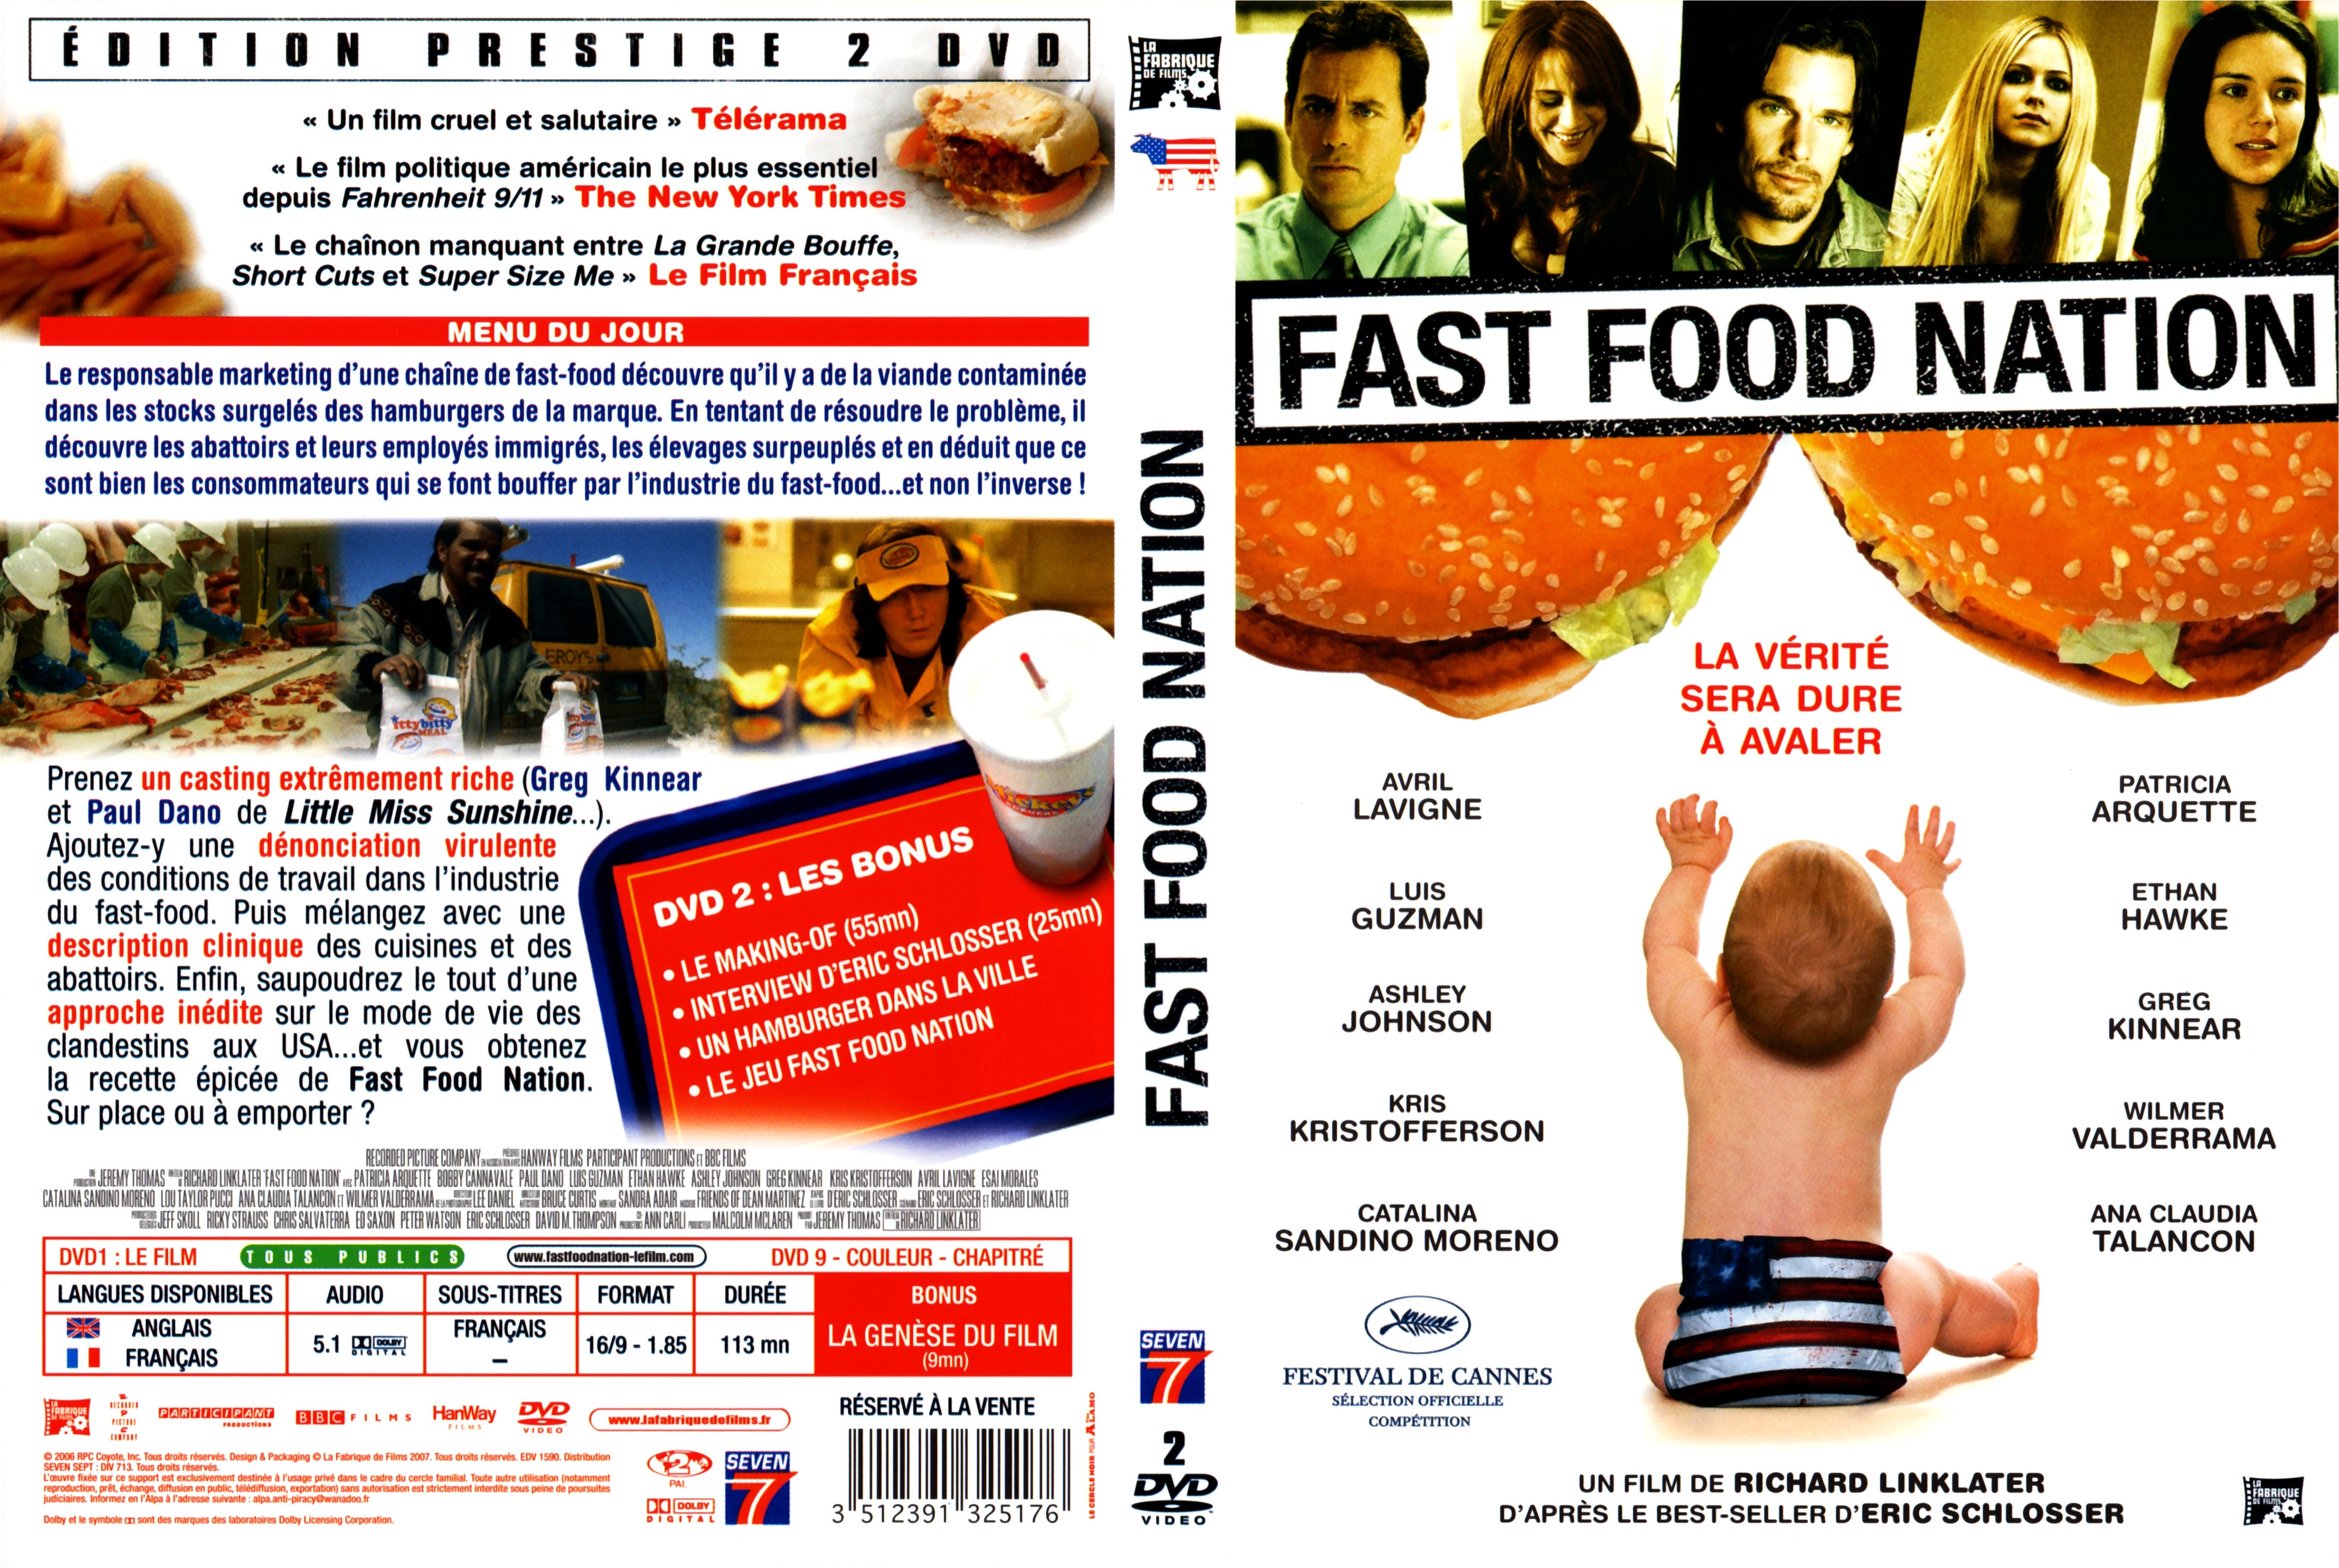 Jaquette DVD Fast food nation